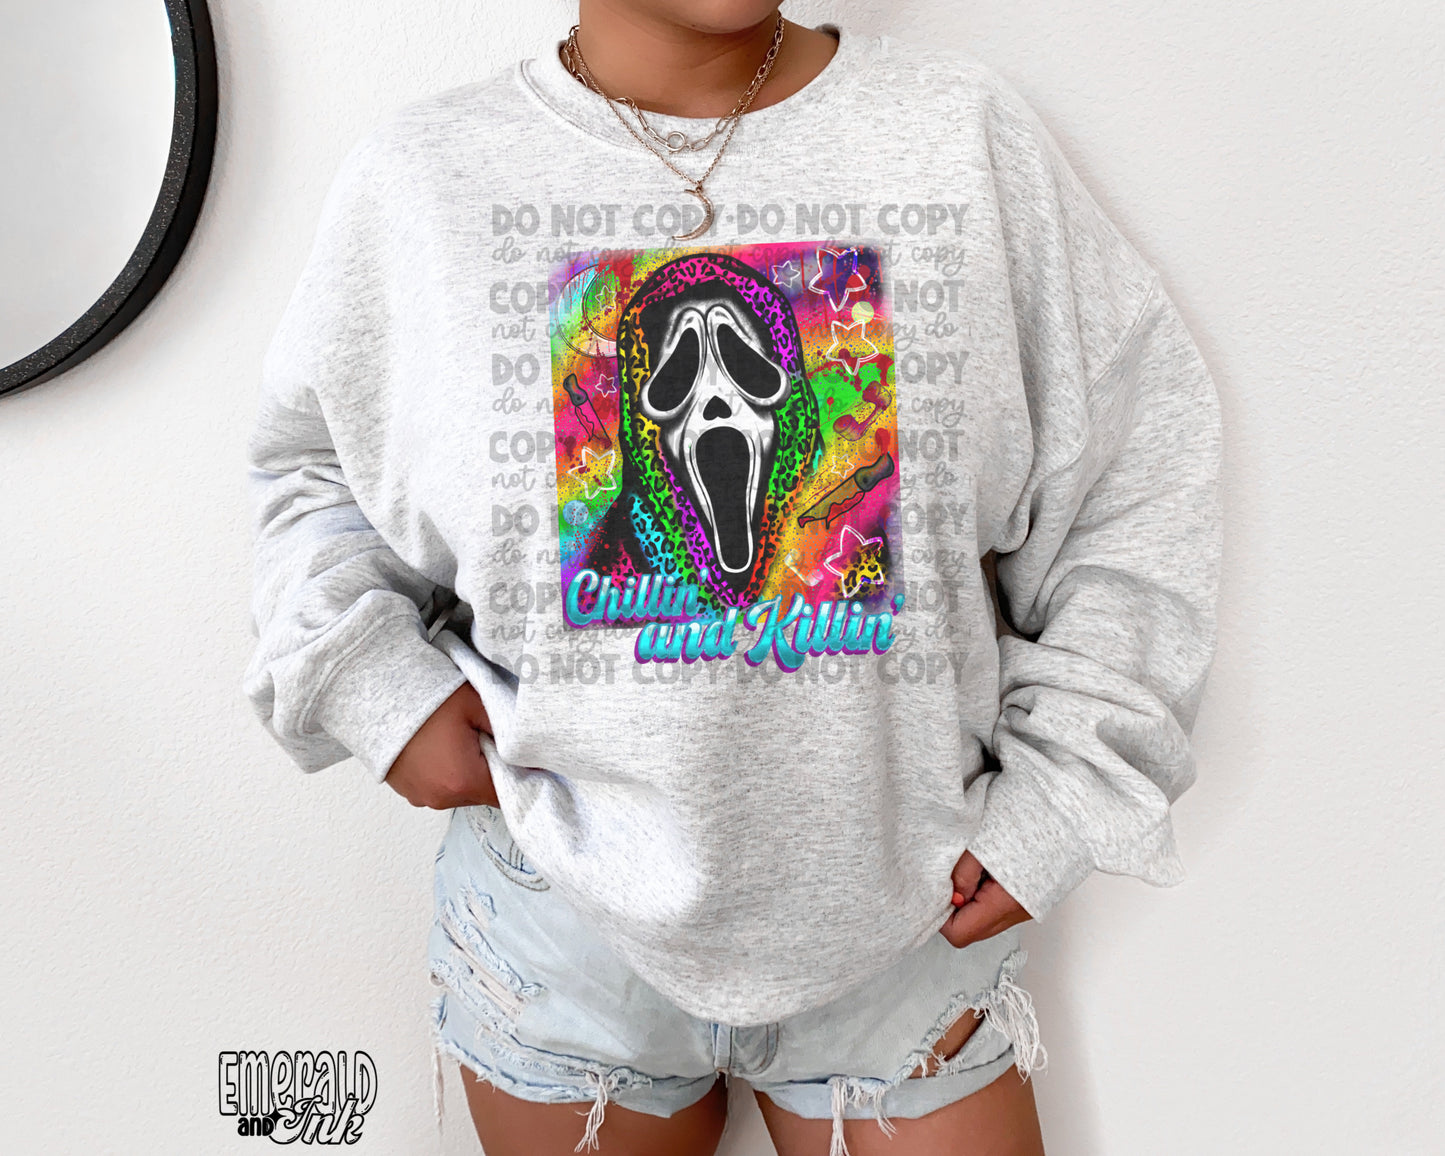 Chillin and killin - Adult Size Sublimation Transfer